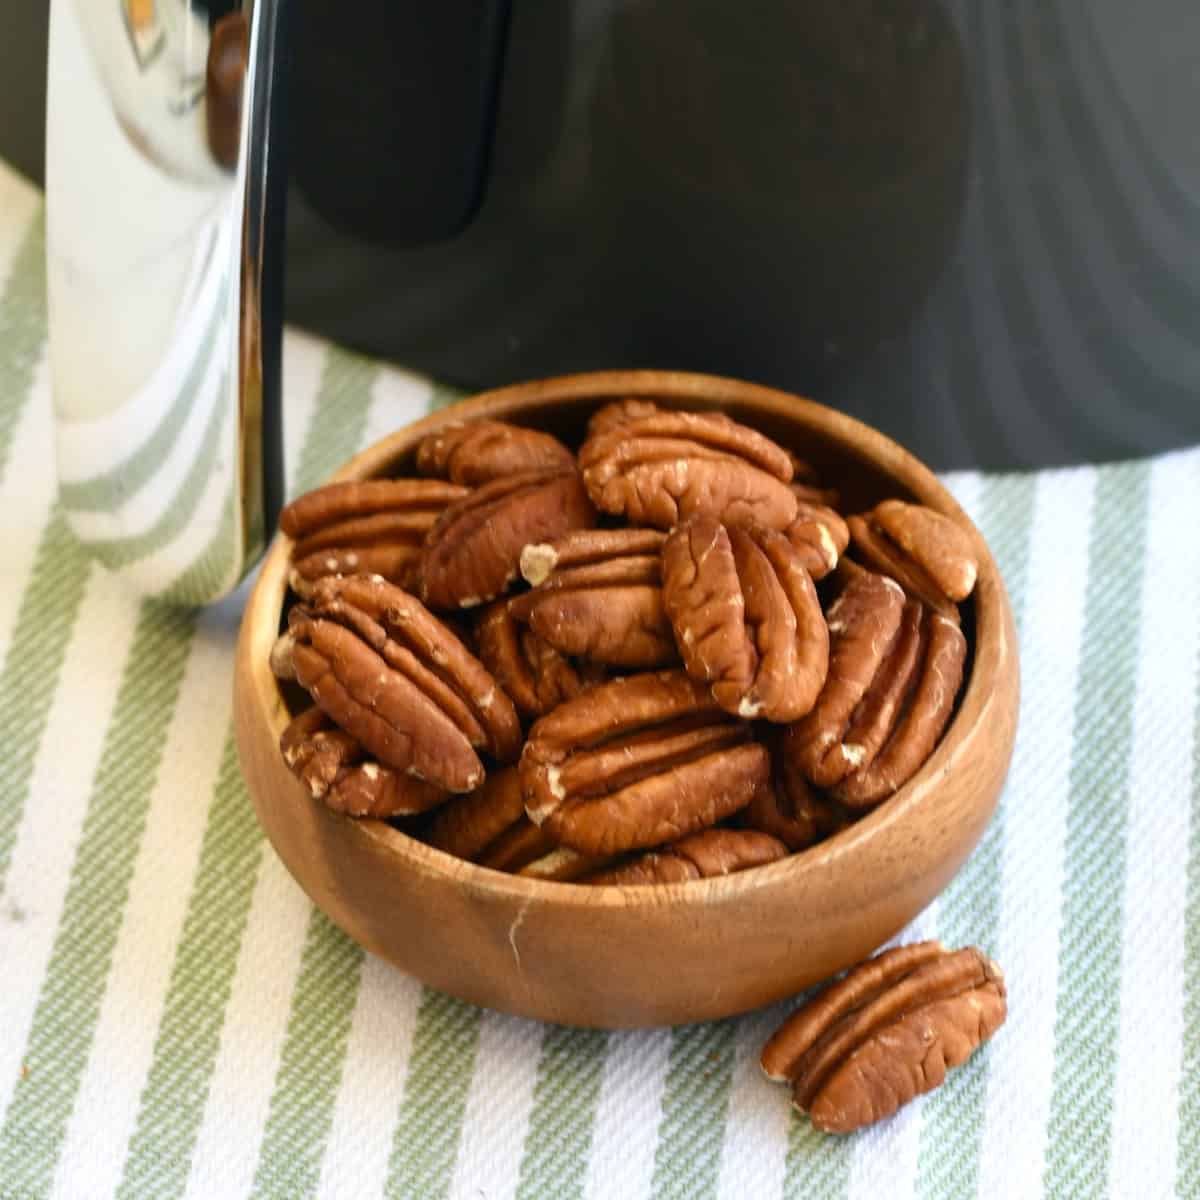 Wooden bowl of pecan halves in front of an air fryer.